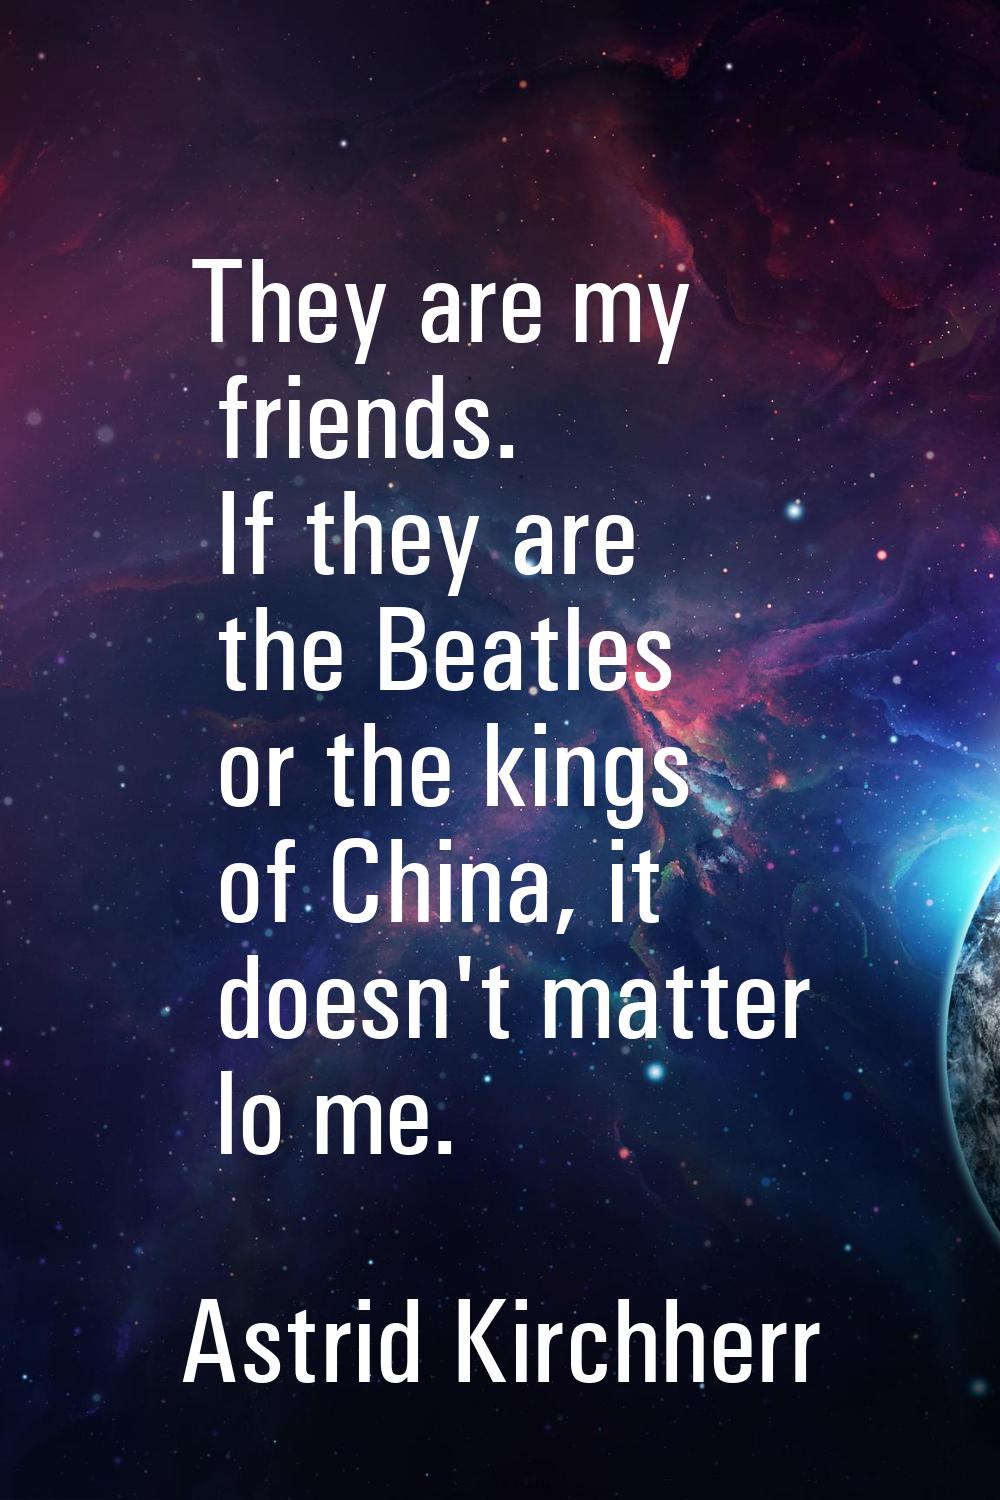 They are my friends. If they are the Beatles or the kings of China, it doesn't matter lo me.